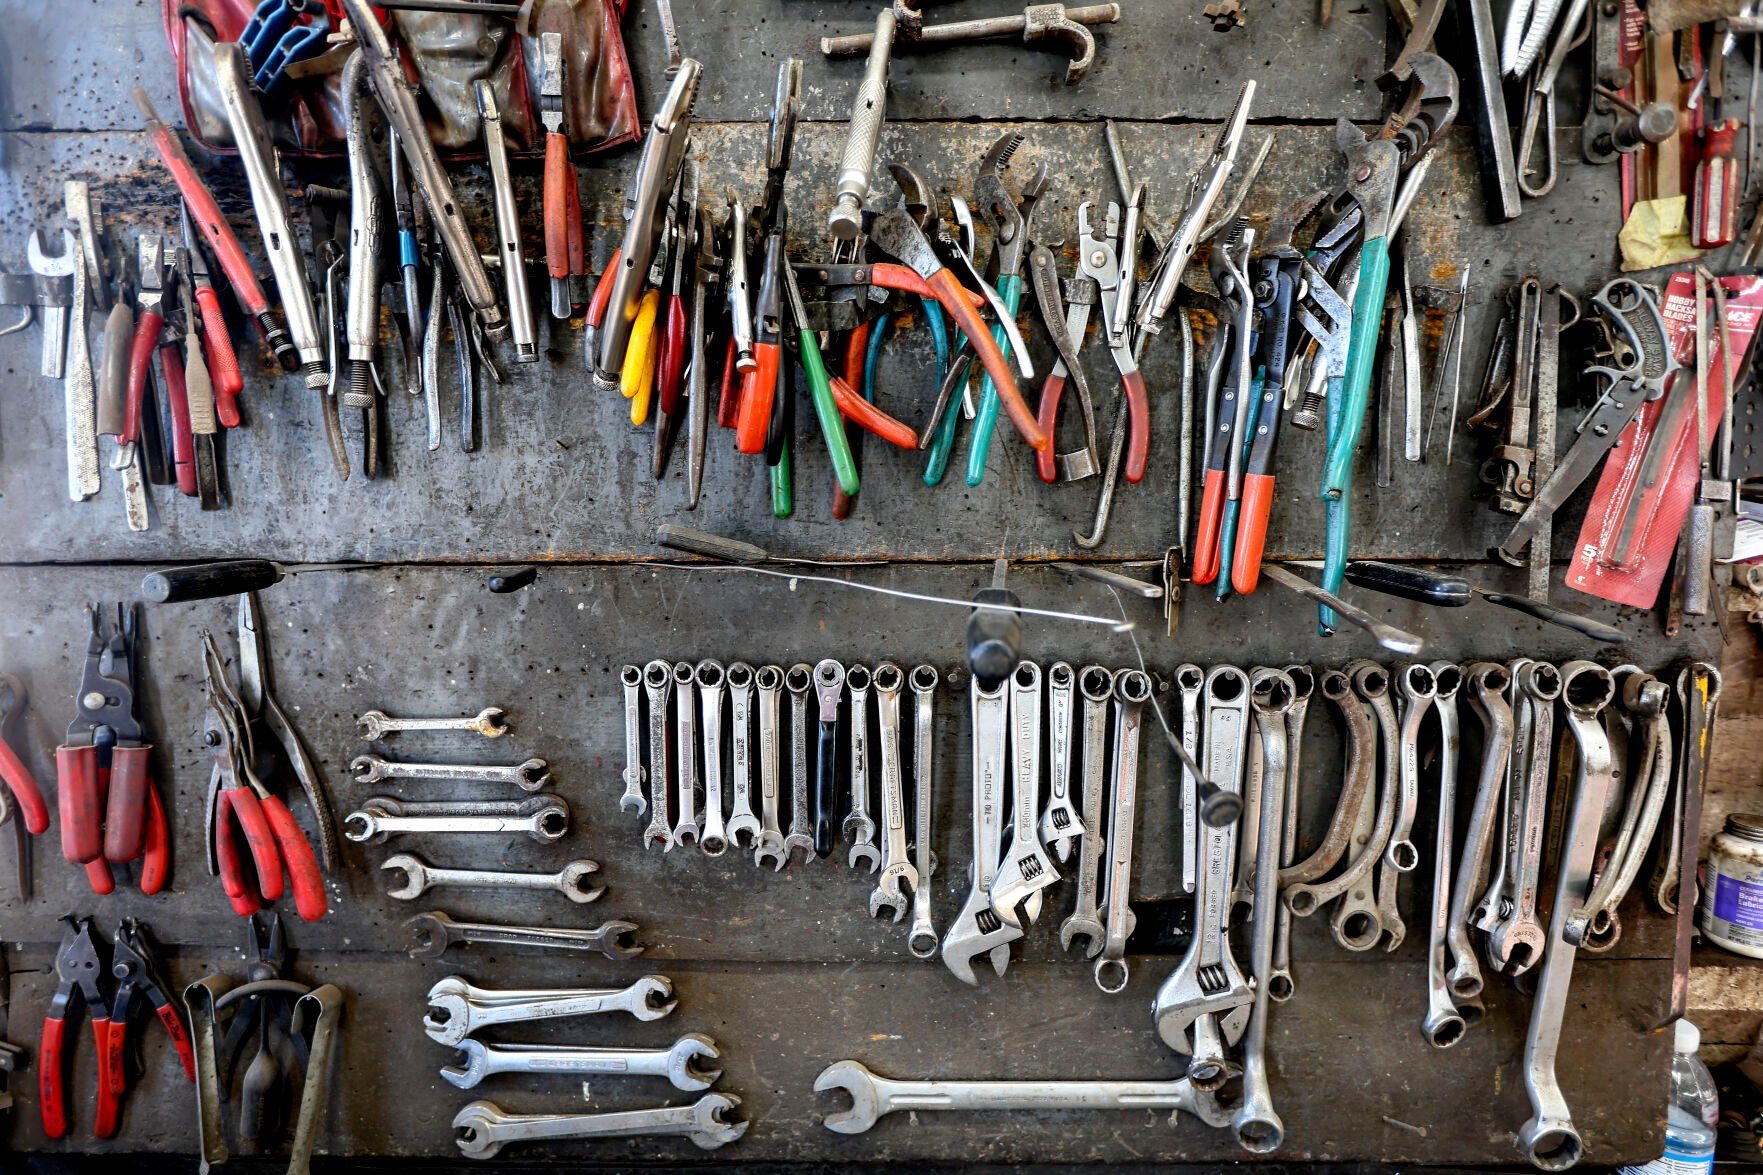 Tools of the trade at Spoerl Automotive in Sherrill, Iowa. The business has been operating at the same location since 1917.    PHOTO CREDIT: Dave Kettering
Telegraph Herald